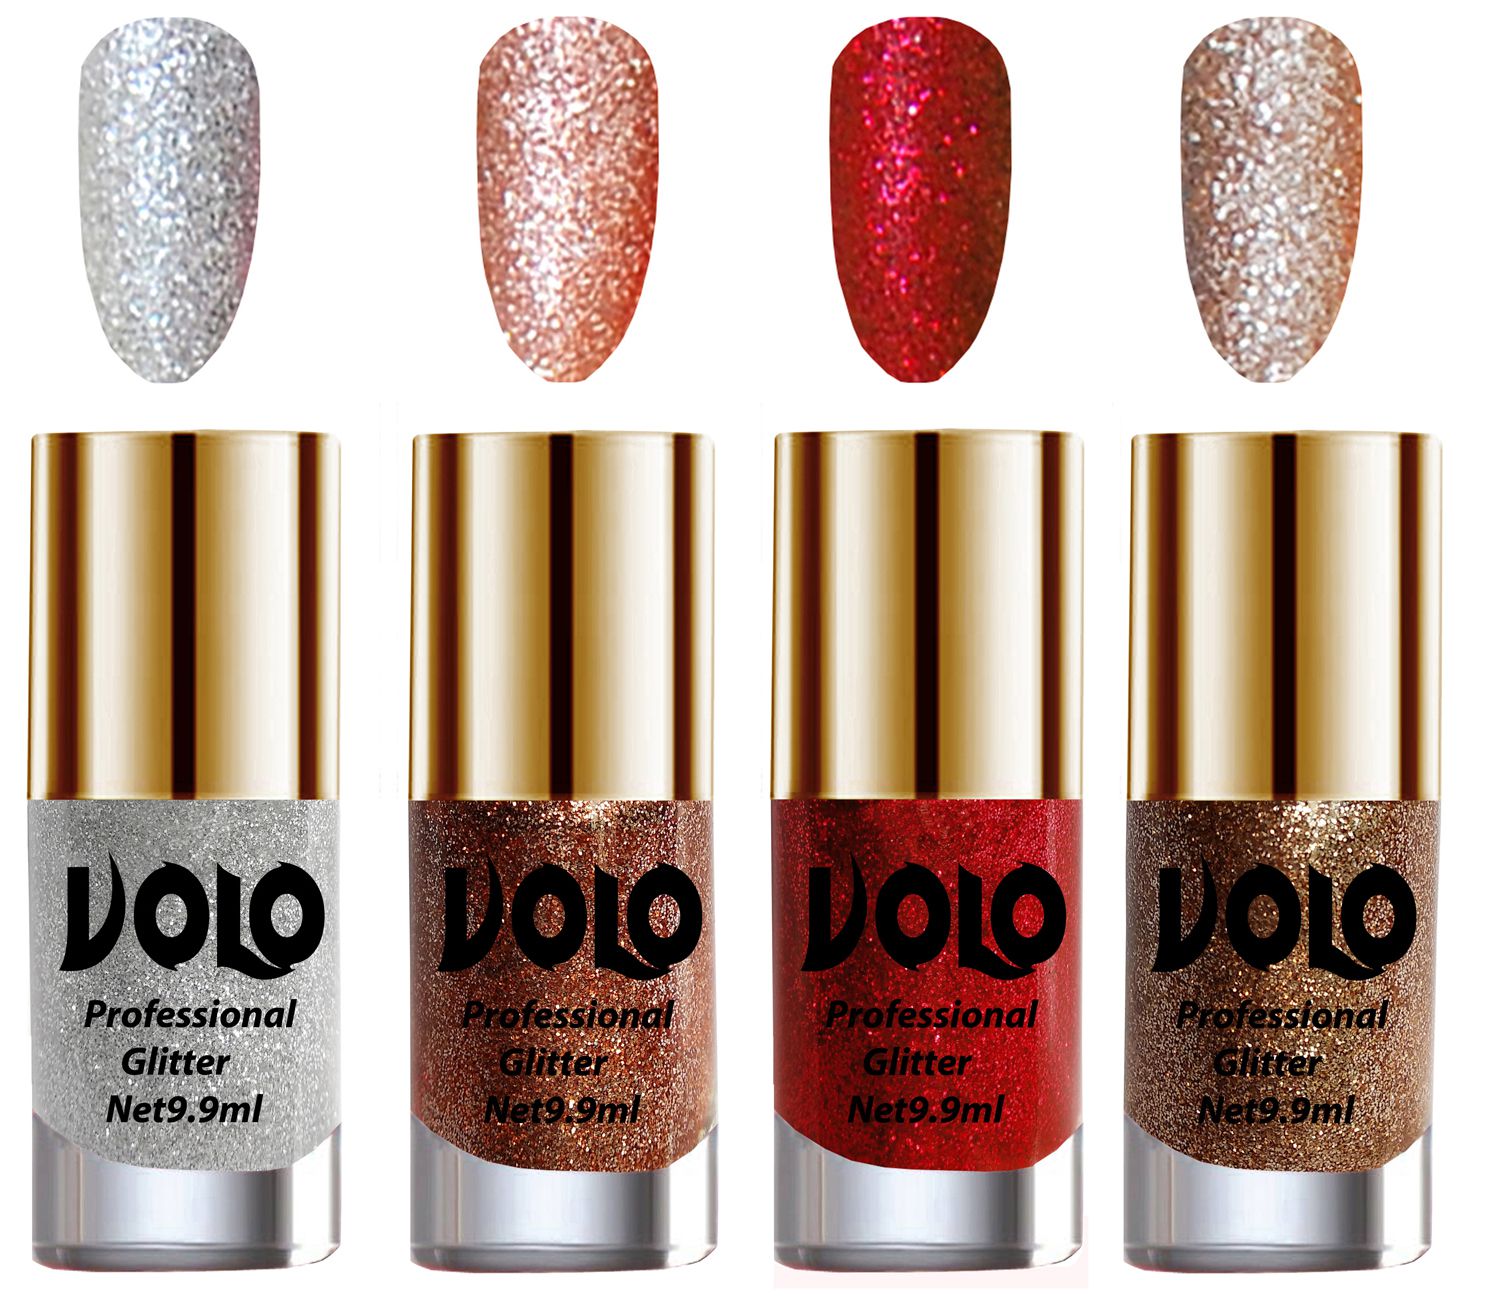     			VOLO Professionally Used Glitter Shine Nail Polish Silver,Peach,Red Gold Pack of 4 39 mL